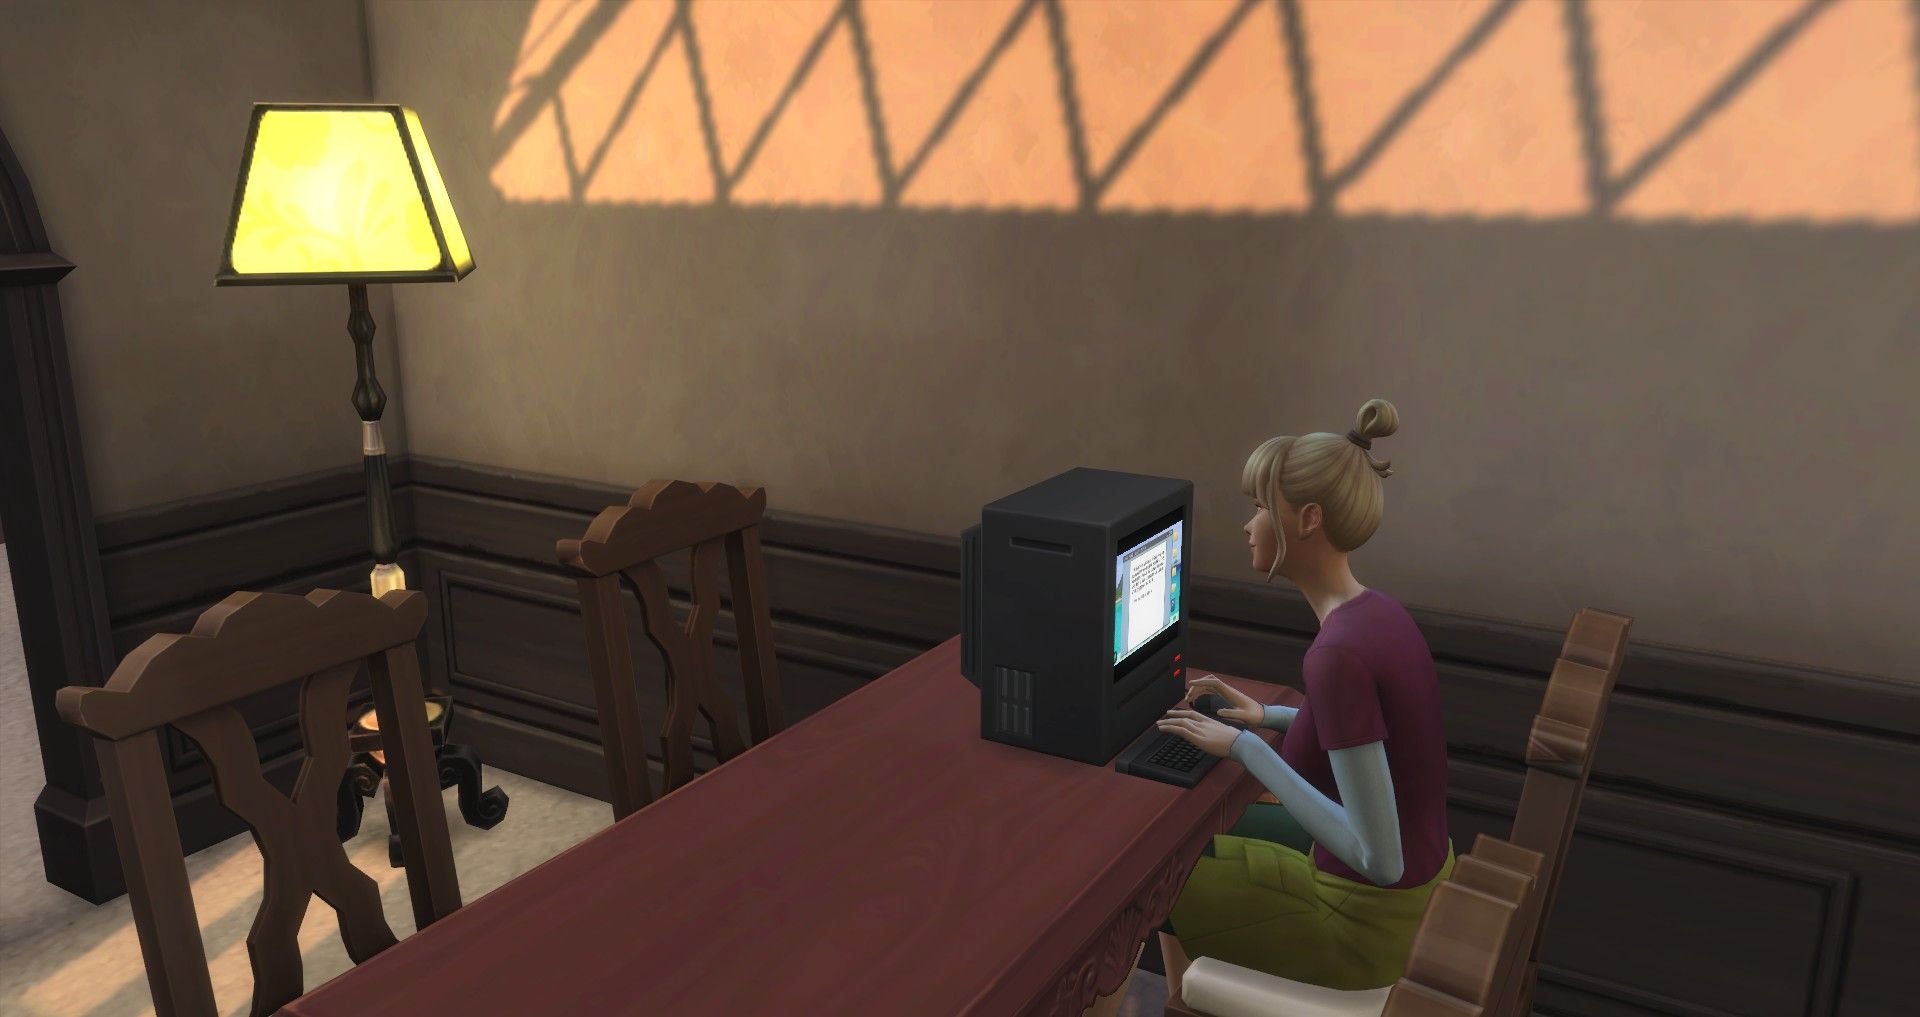 sims 4 publish research paper